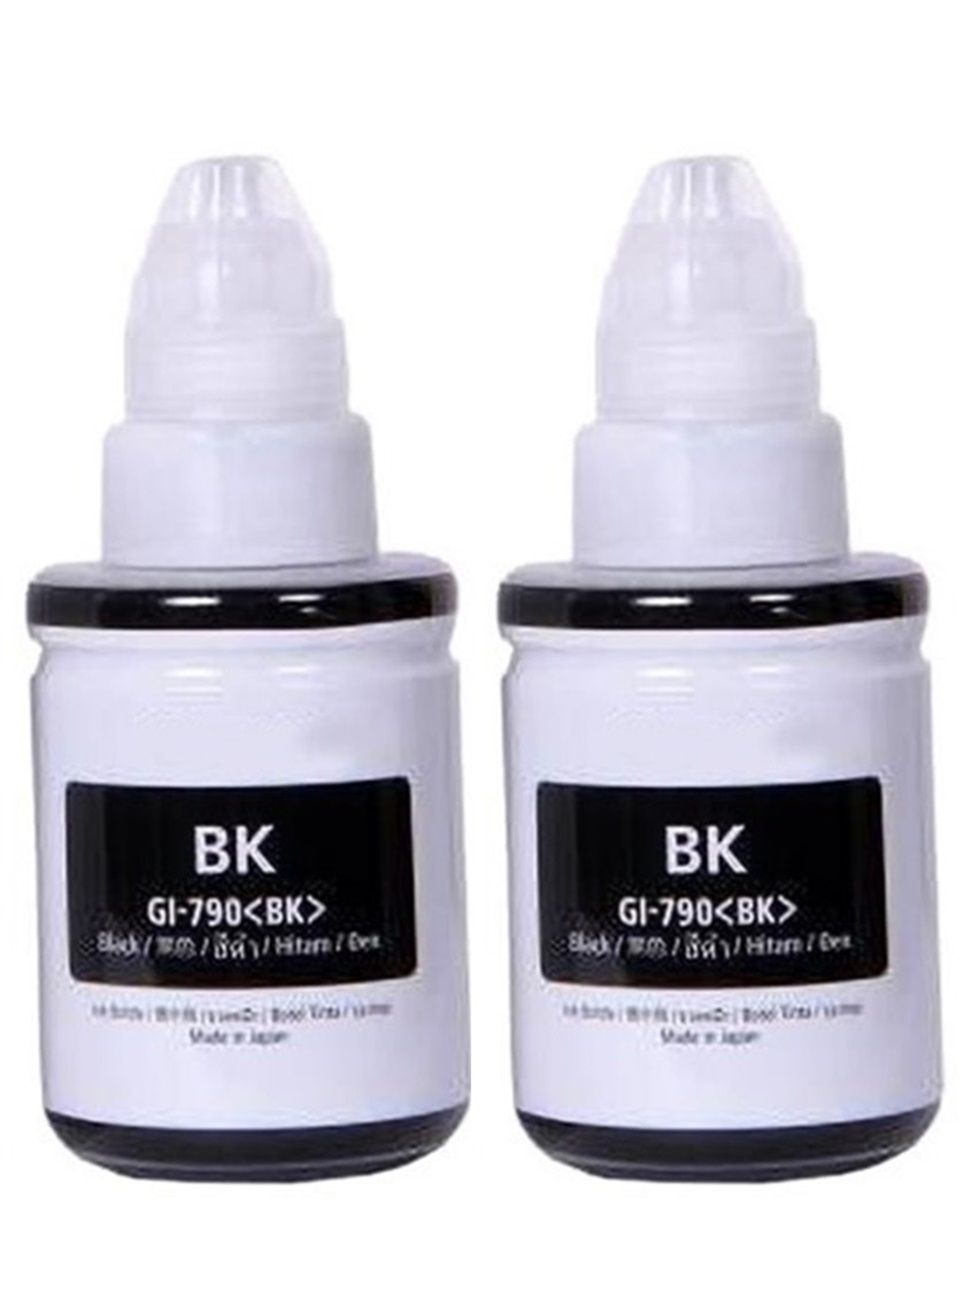     			TEQUO Ink For G3010 Gi-790 Black Pack of 2 Cartridge for Inkjet Printers G1000,G1010,G1100,G2000,G2002,G2010,G2012,G2100,G3000,G3010,G3012,G3100,G4000,G4010